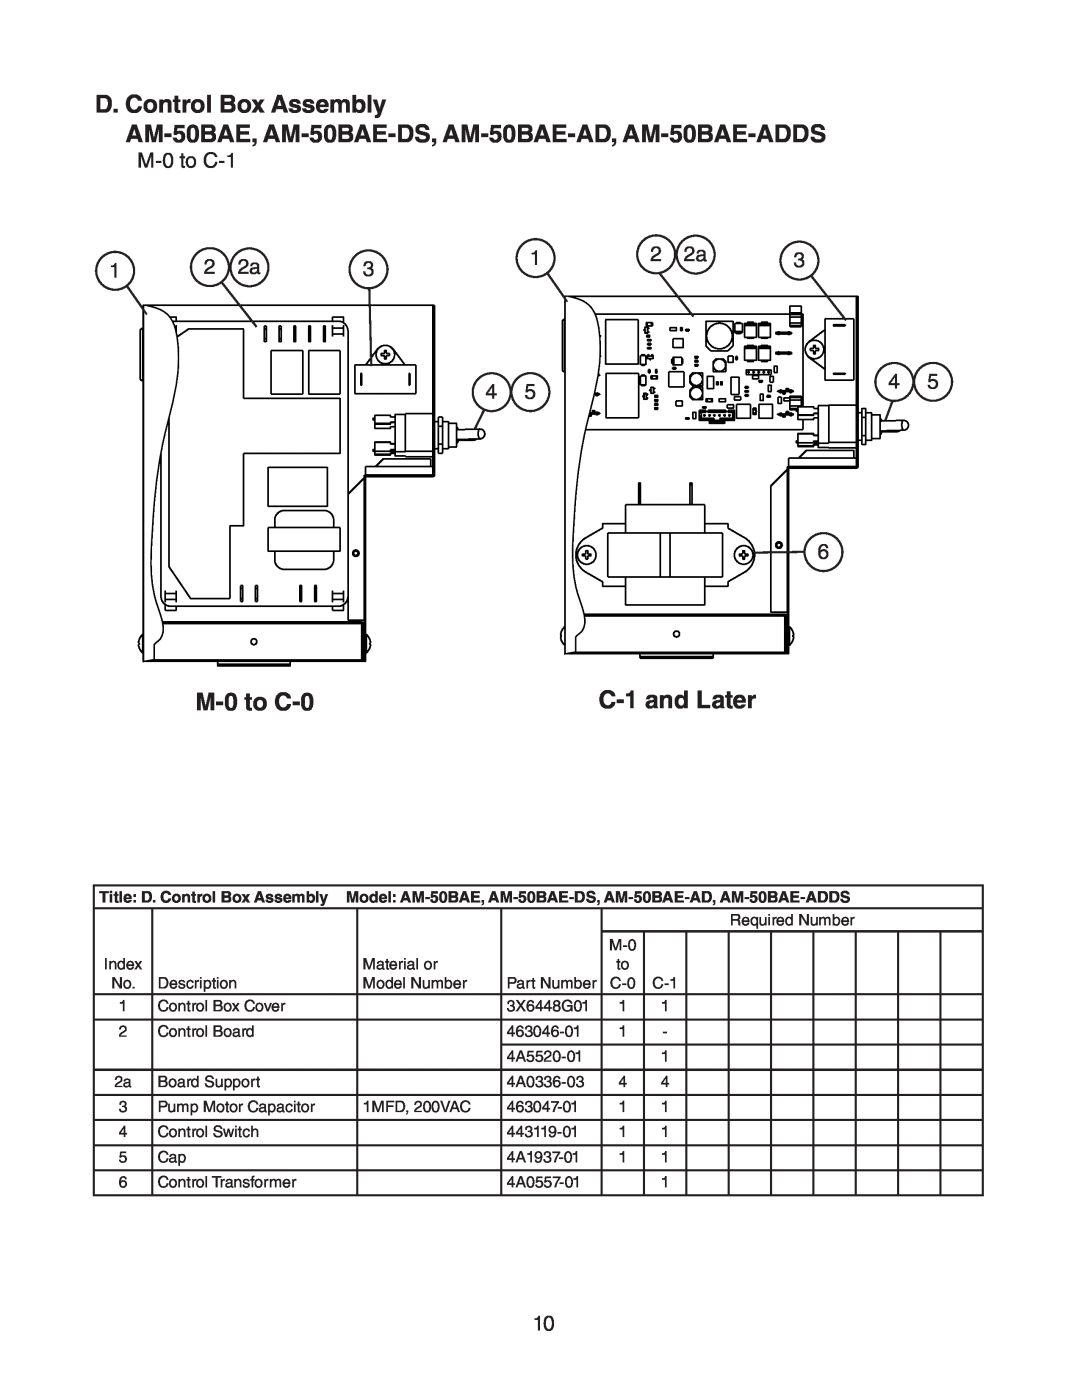 Hoshizaki AM-50BAE-ADDS, AM-50BAE-DS manual D. Control Box Assembly, M-0to C-0, C-1and Later 